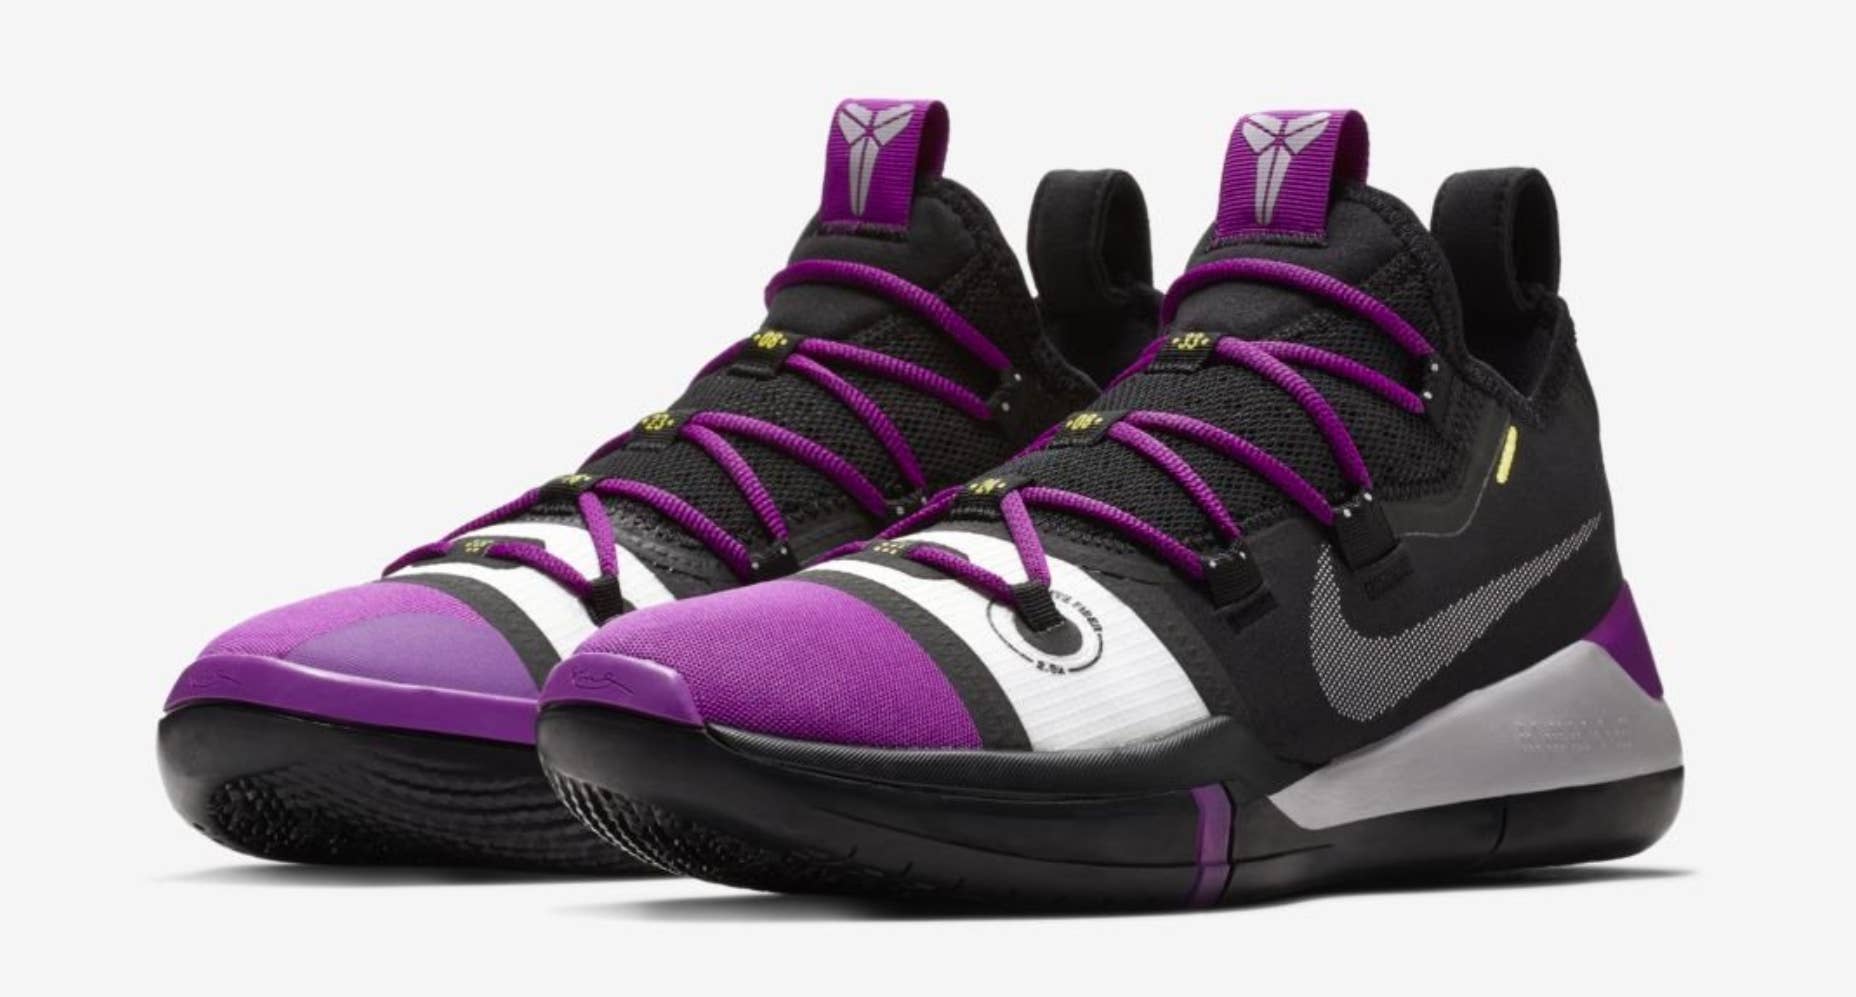 Nike unveiled the new Black Mamba colorway for the Kobe A.D.